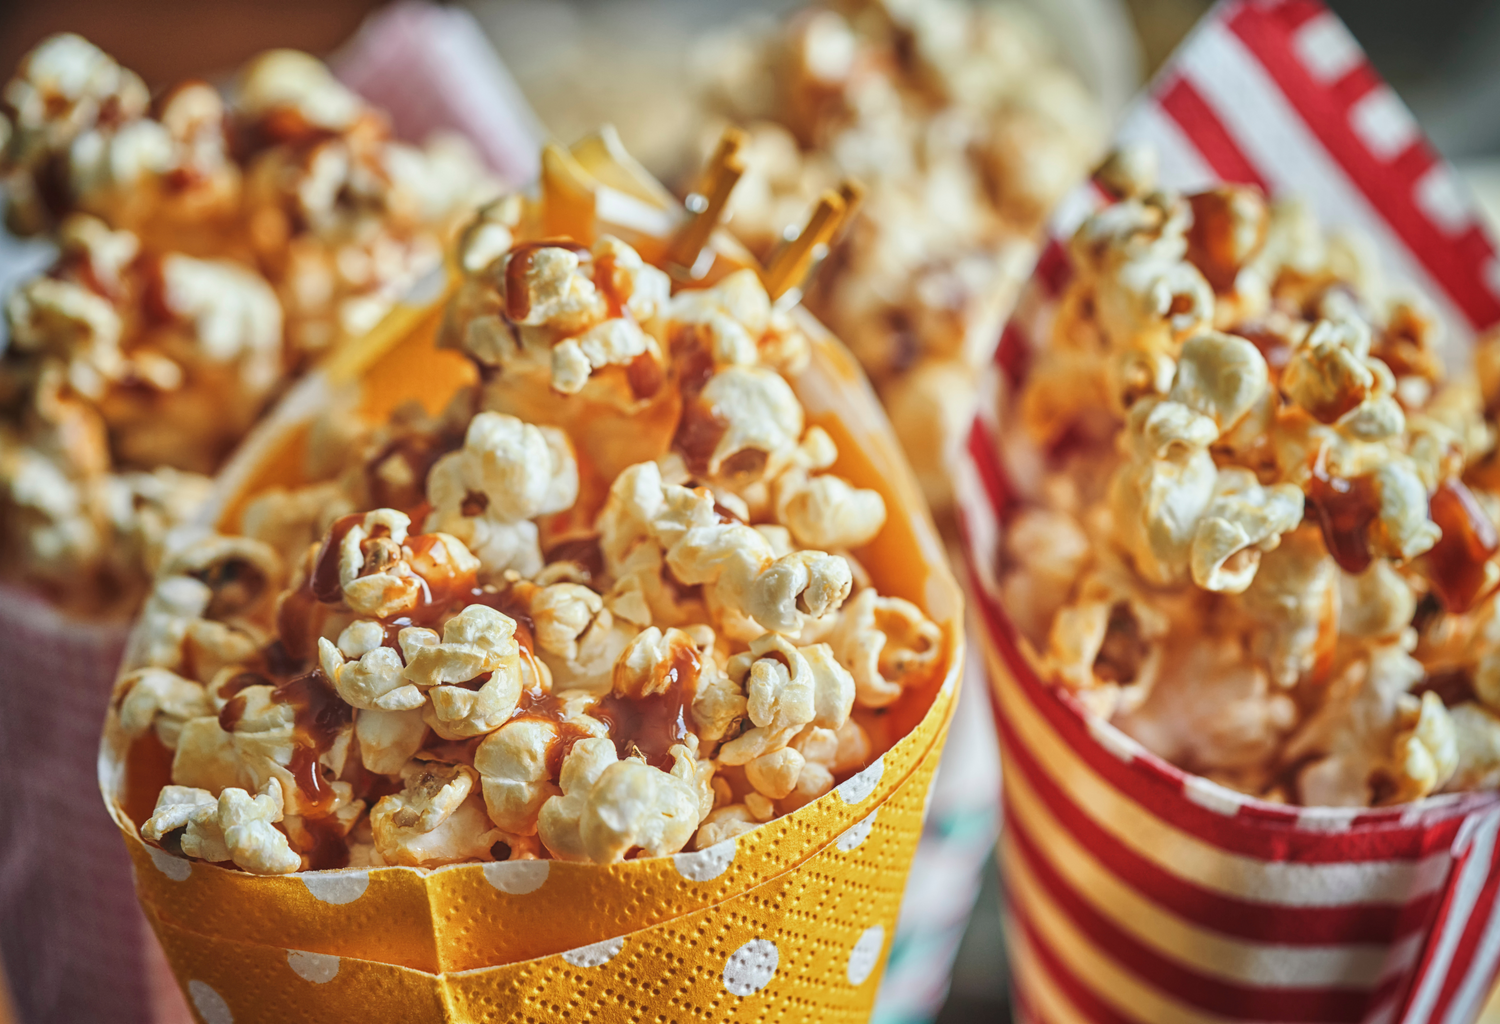 Gourmet Flavors and Theater Popcorn